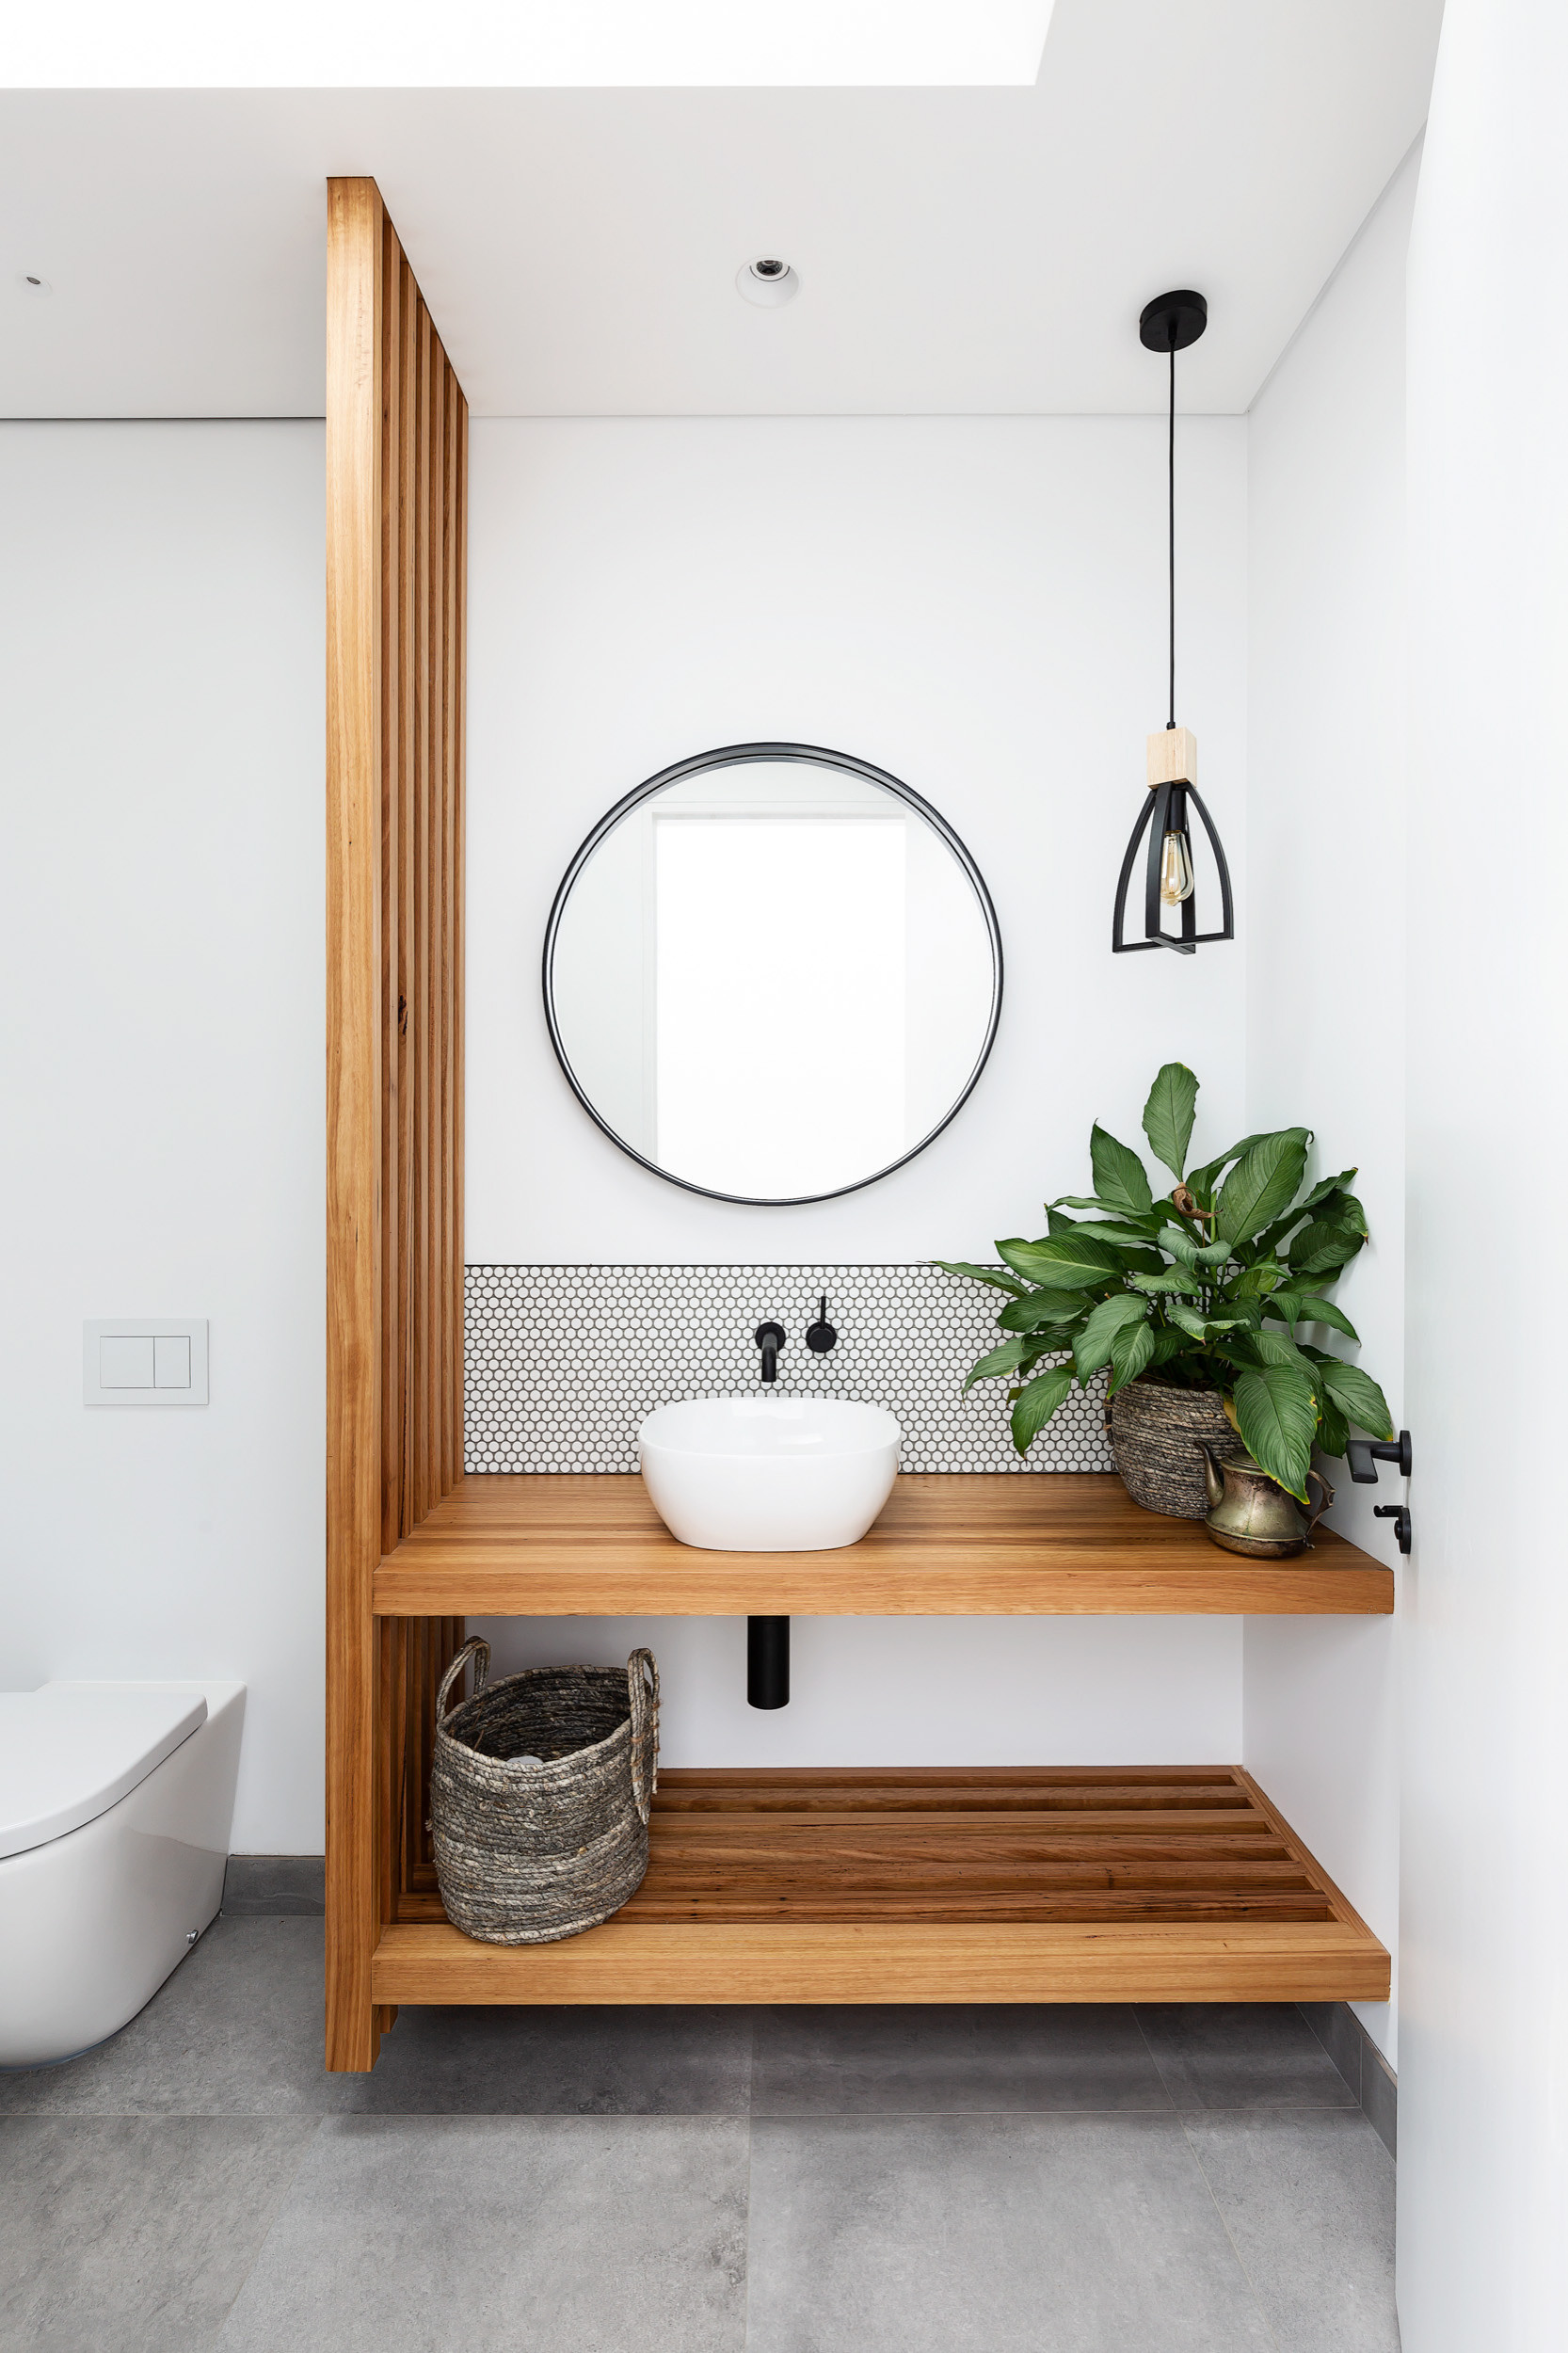 20 Bathroom Storage Solutions That Will Work In Even The Smallest Spaces